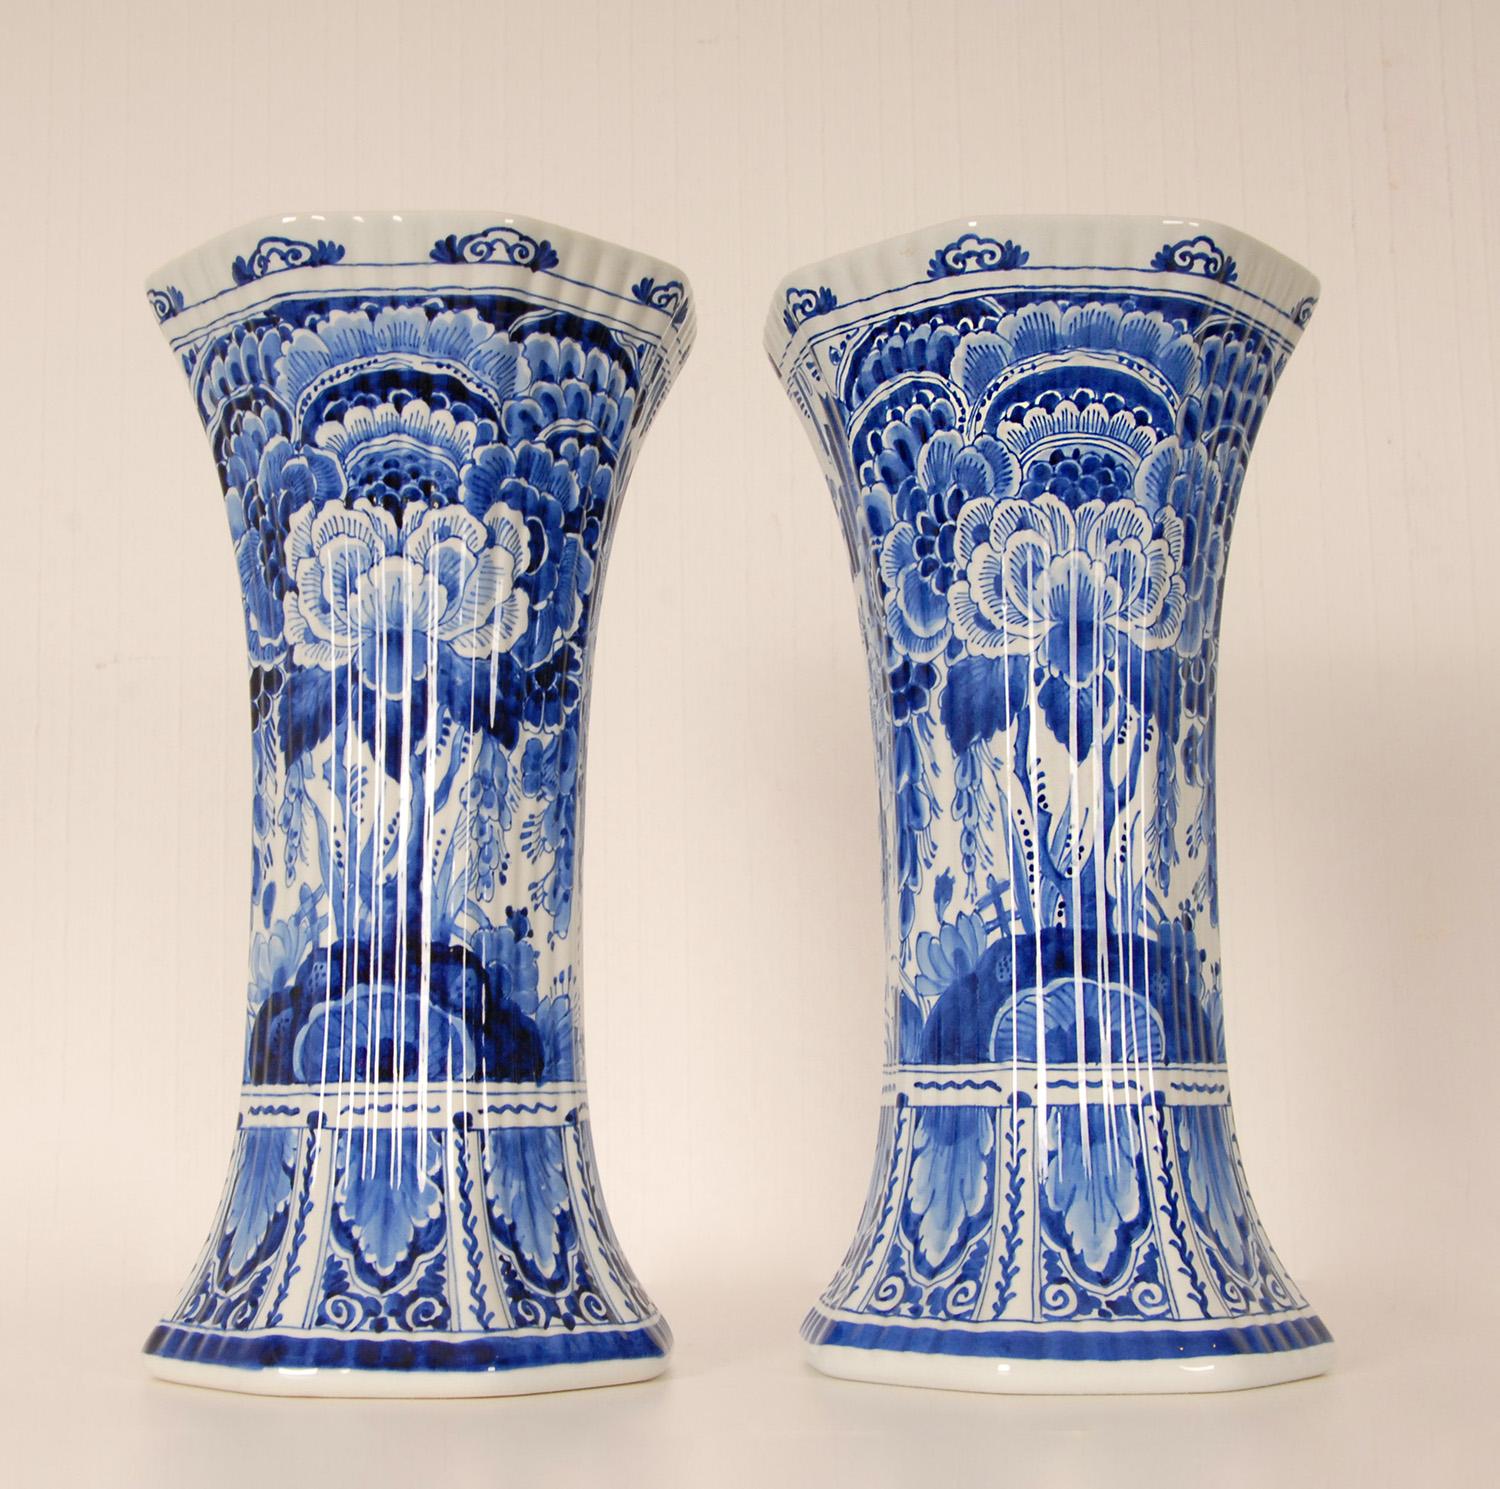 20th Century Royal Delft Garniture of 3 Vases Chinoiserie Beaker and Baluster Vases a pair For Sale